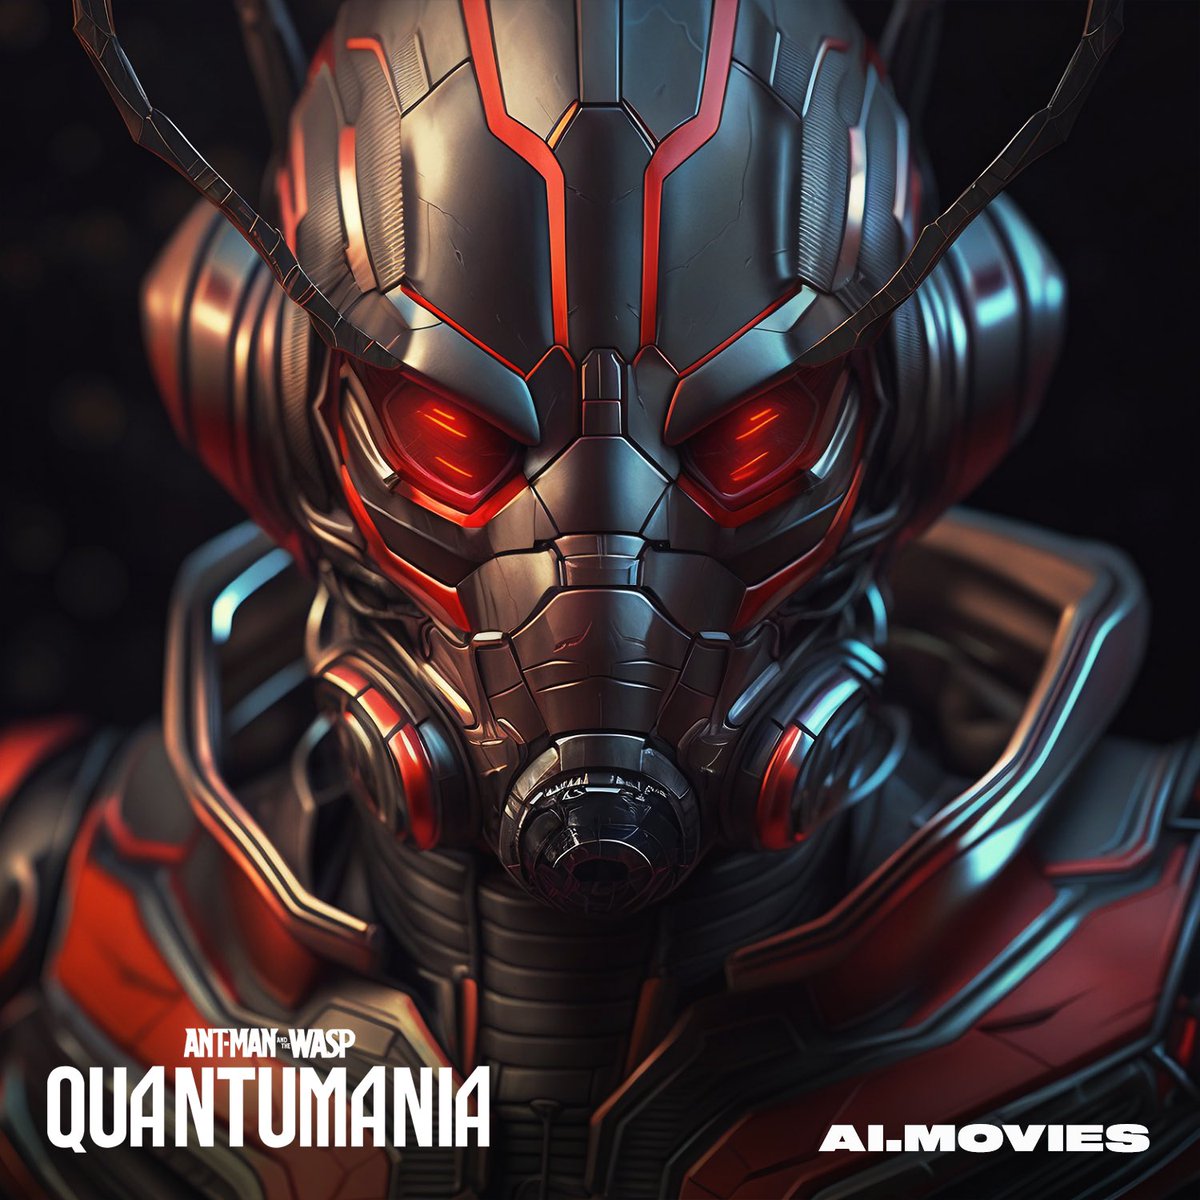 🍿 Ant-Man and the Wasp Quantumania 2023
➡️ Ant-Man
💻 Midjourney / Photoshop

•

#midjourney #midjourneyart #midjourneyartwork #midjourneycommunity #midjourneygallery #antman #antmanandthewasp #antmanedit #antmanandthewaspquantumania #marvel #marvelcomics #marvelstudios